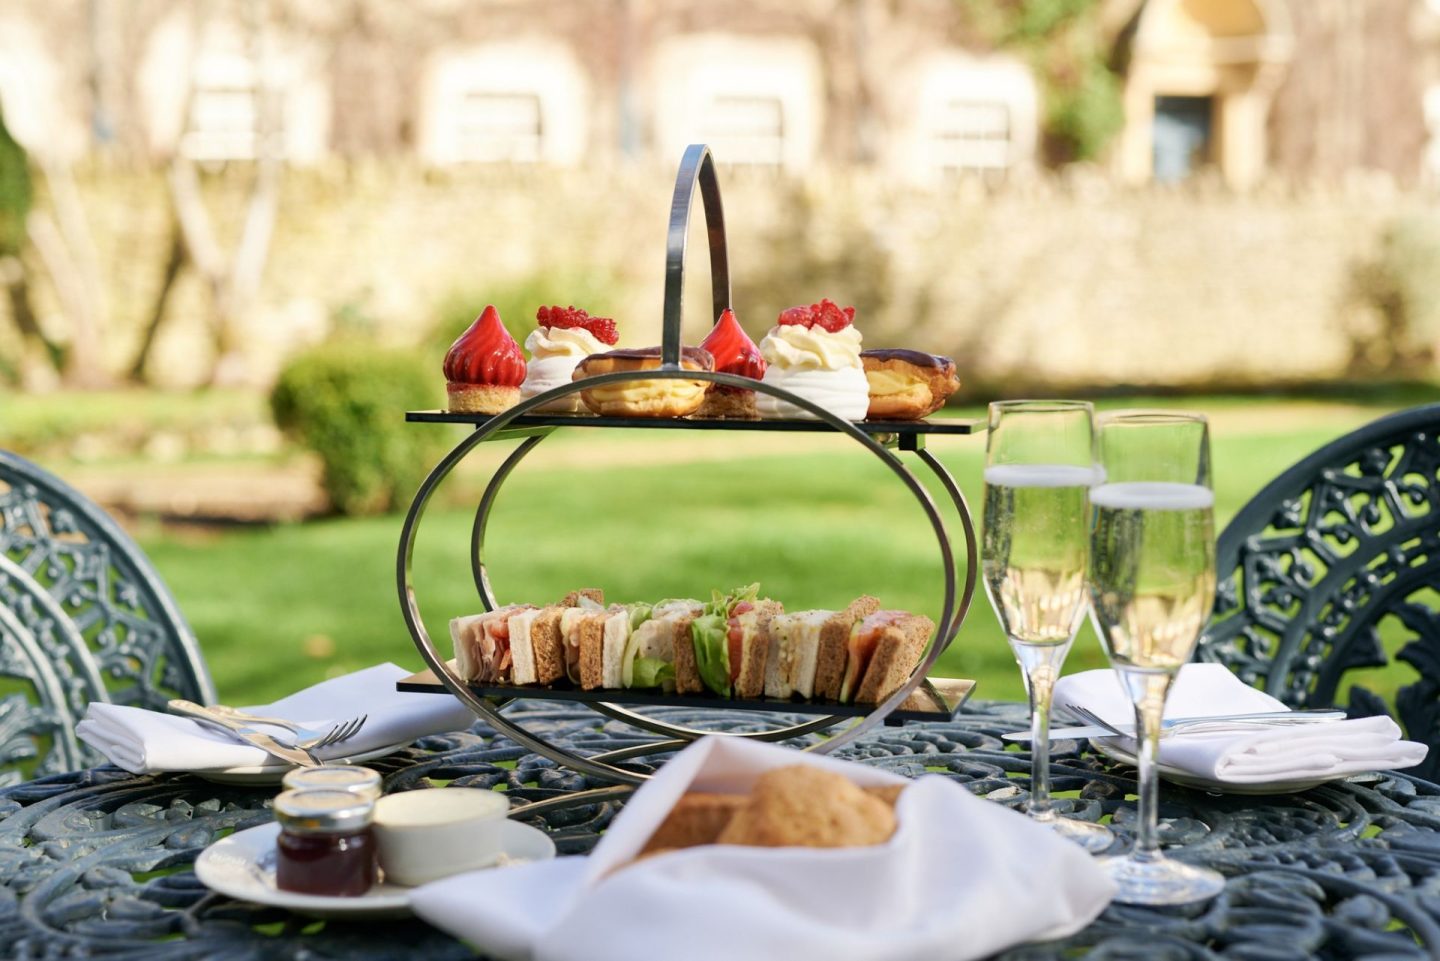 Afternoon tea in the Cotswolds